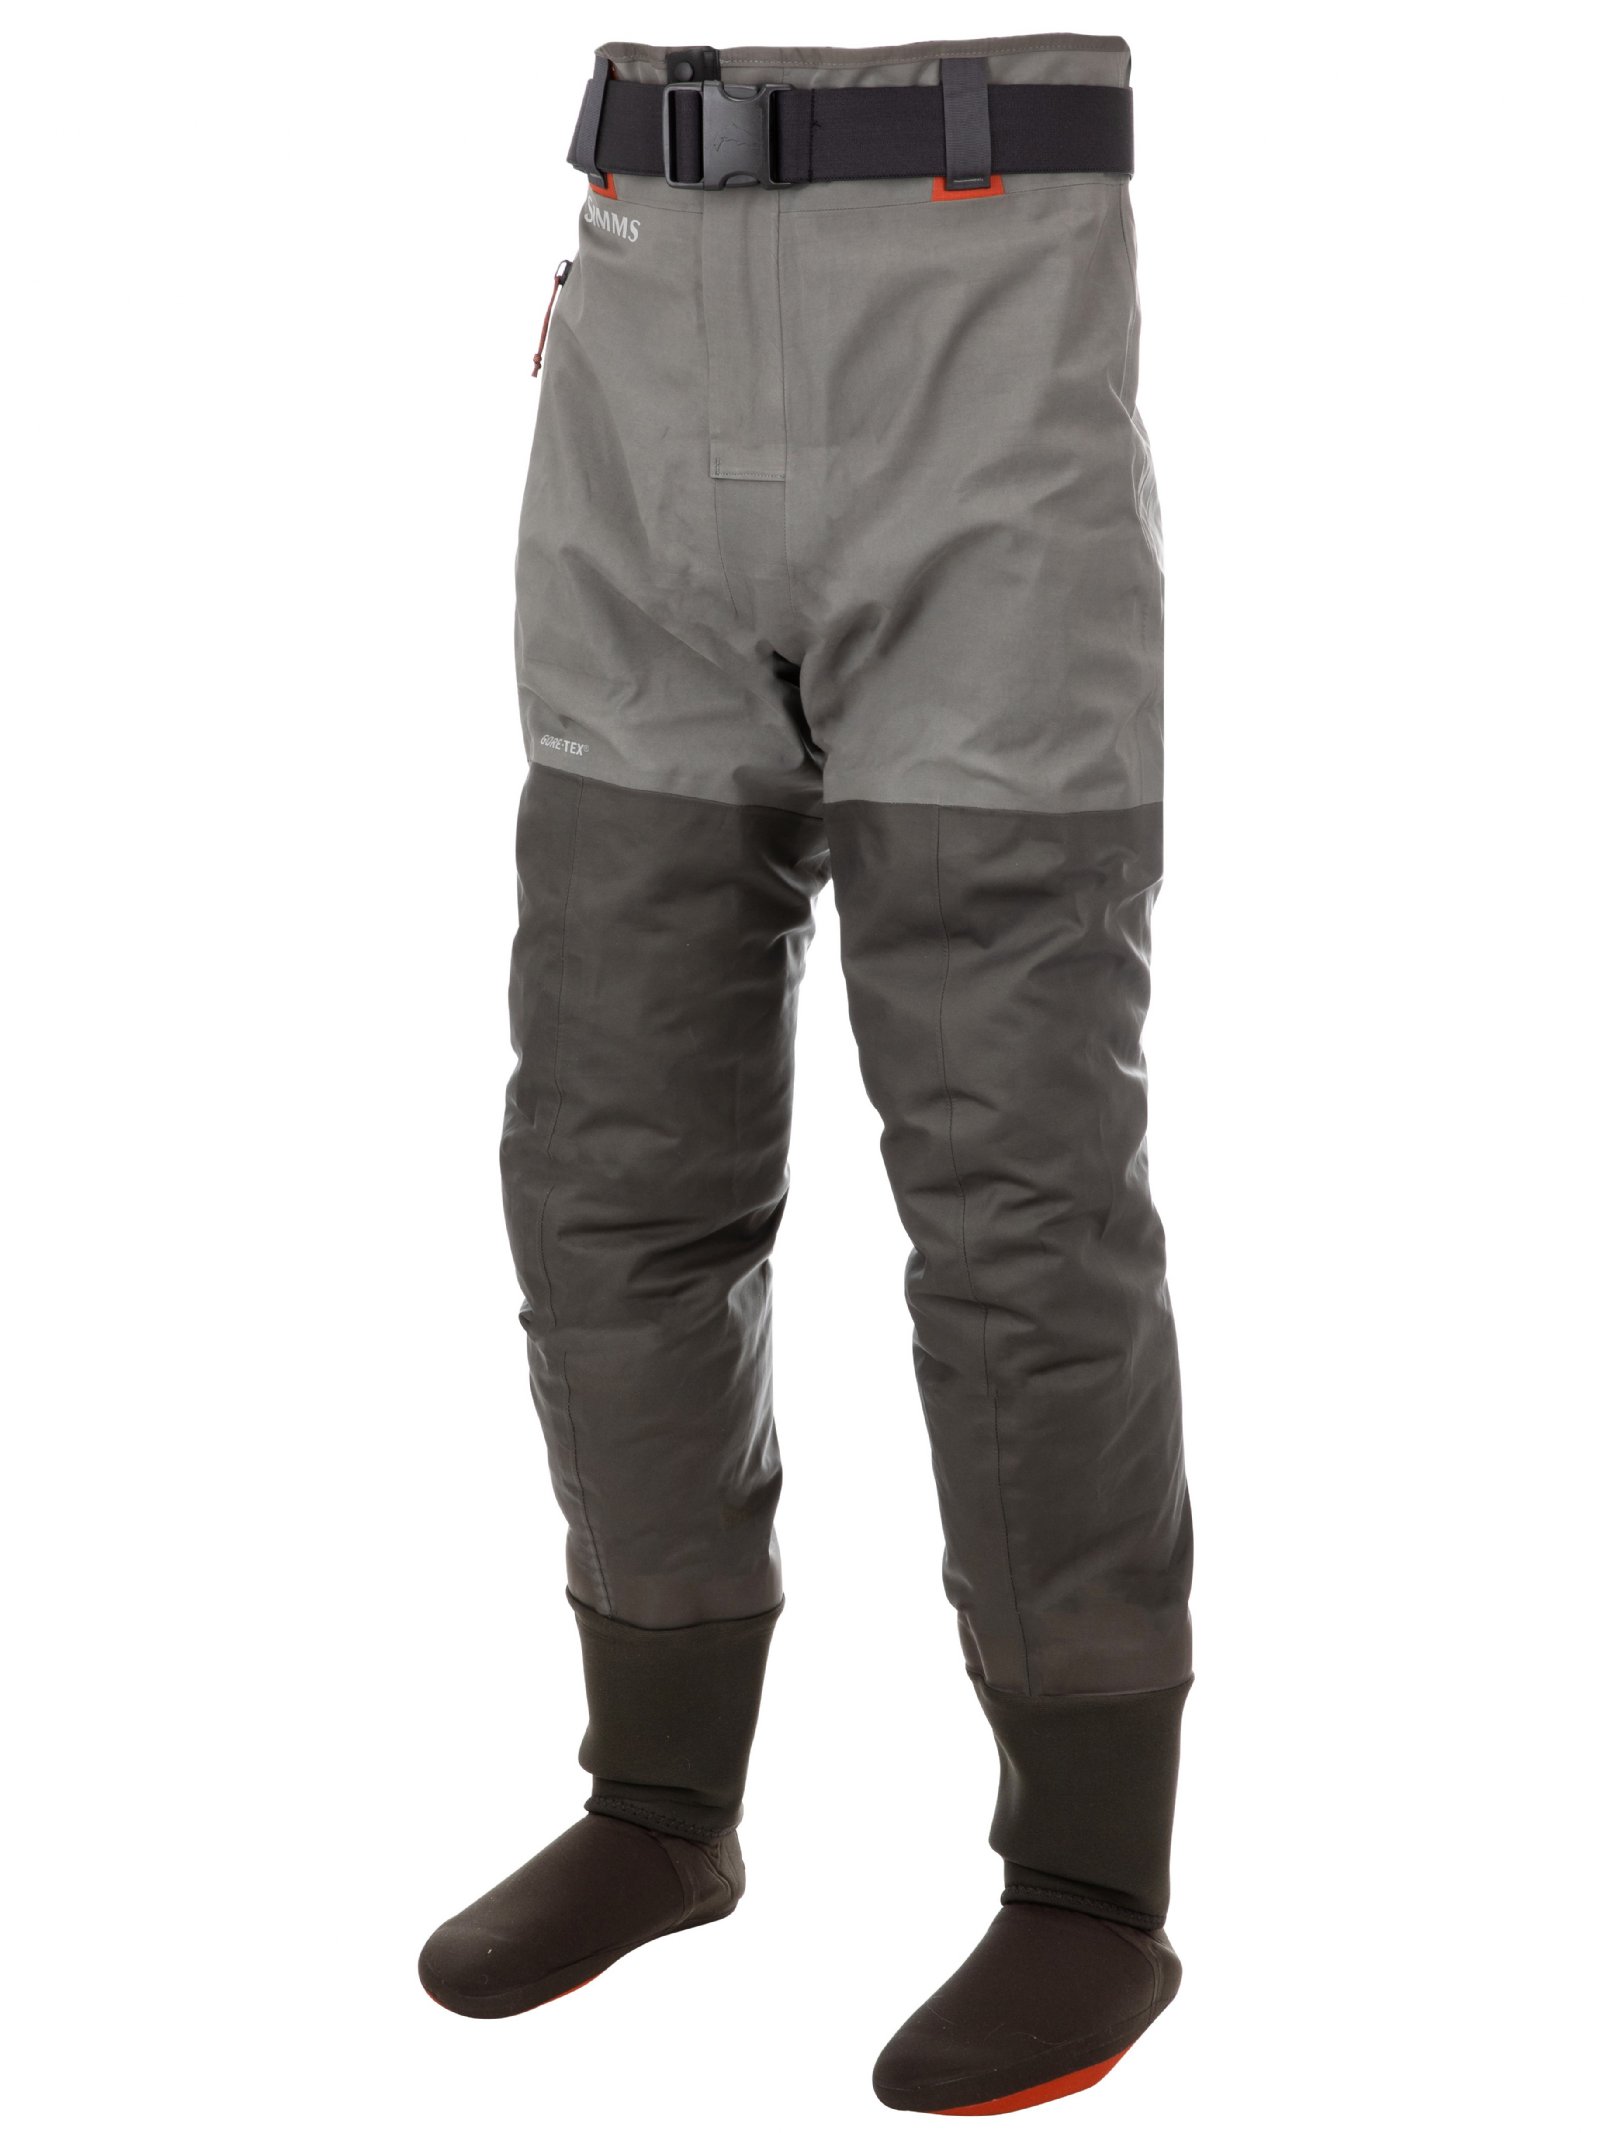 Simms M's G3 Guide Wading Pant - XXL